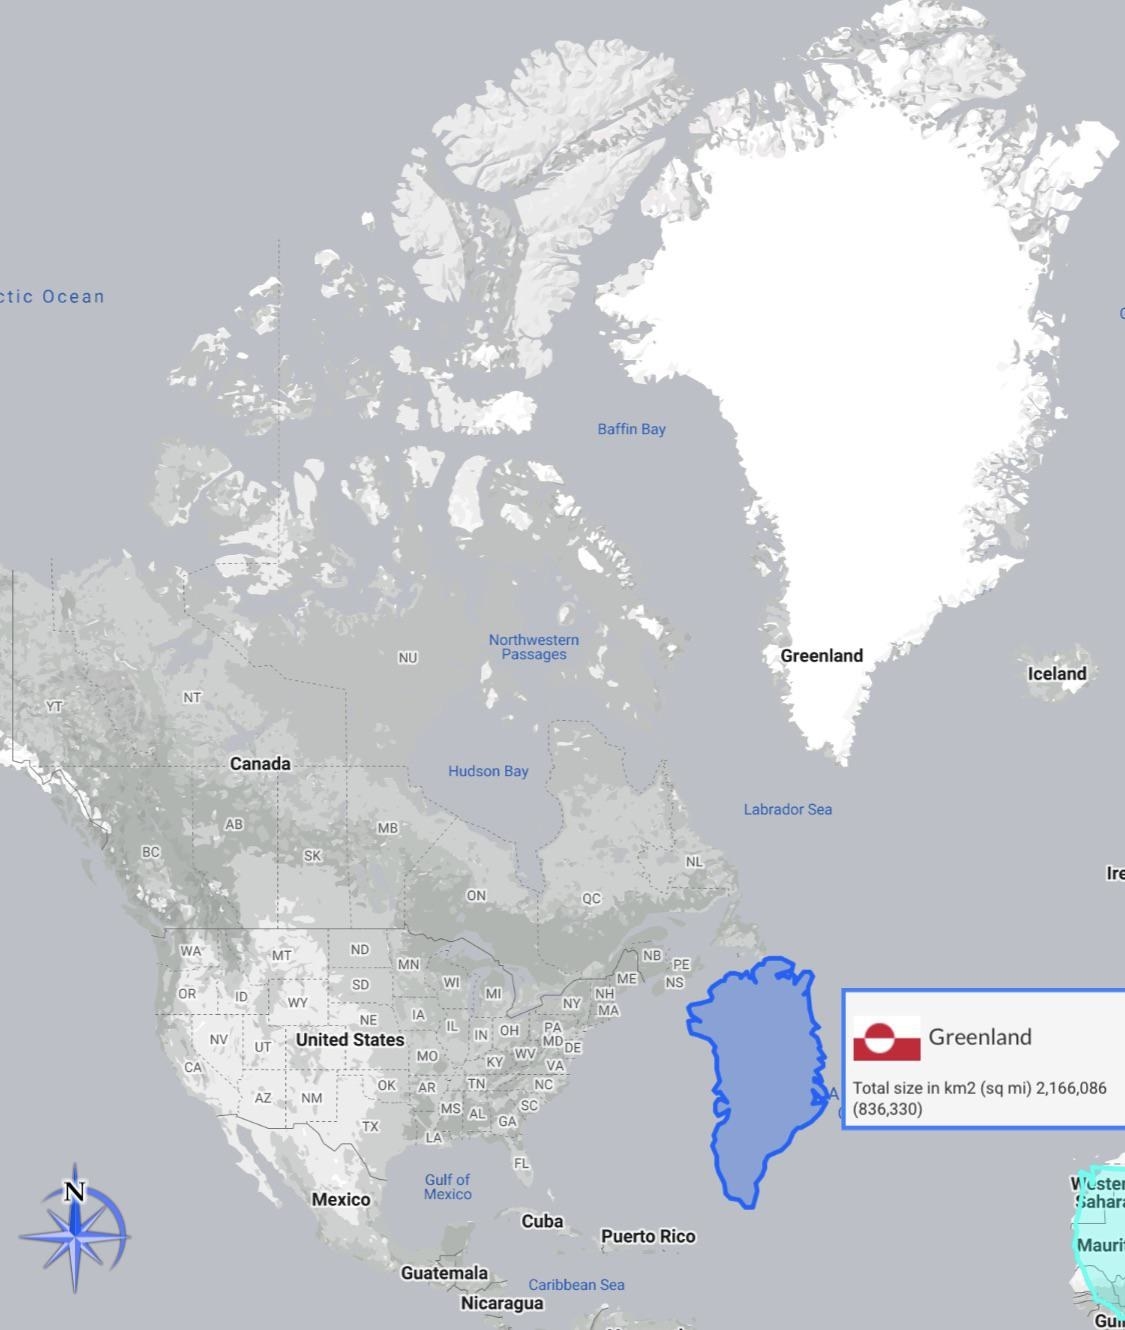 Greenland appears bigger than the continental US on the original map but is about a third of its size